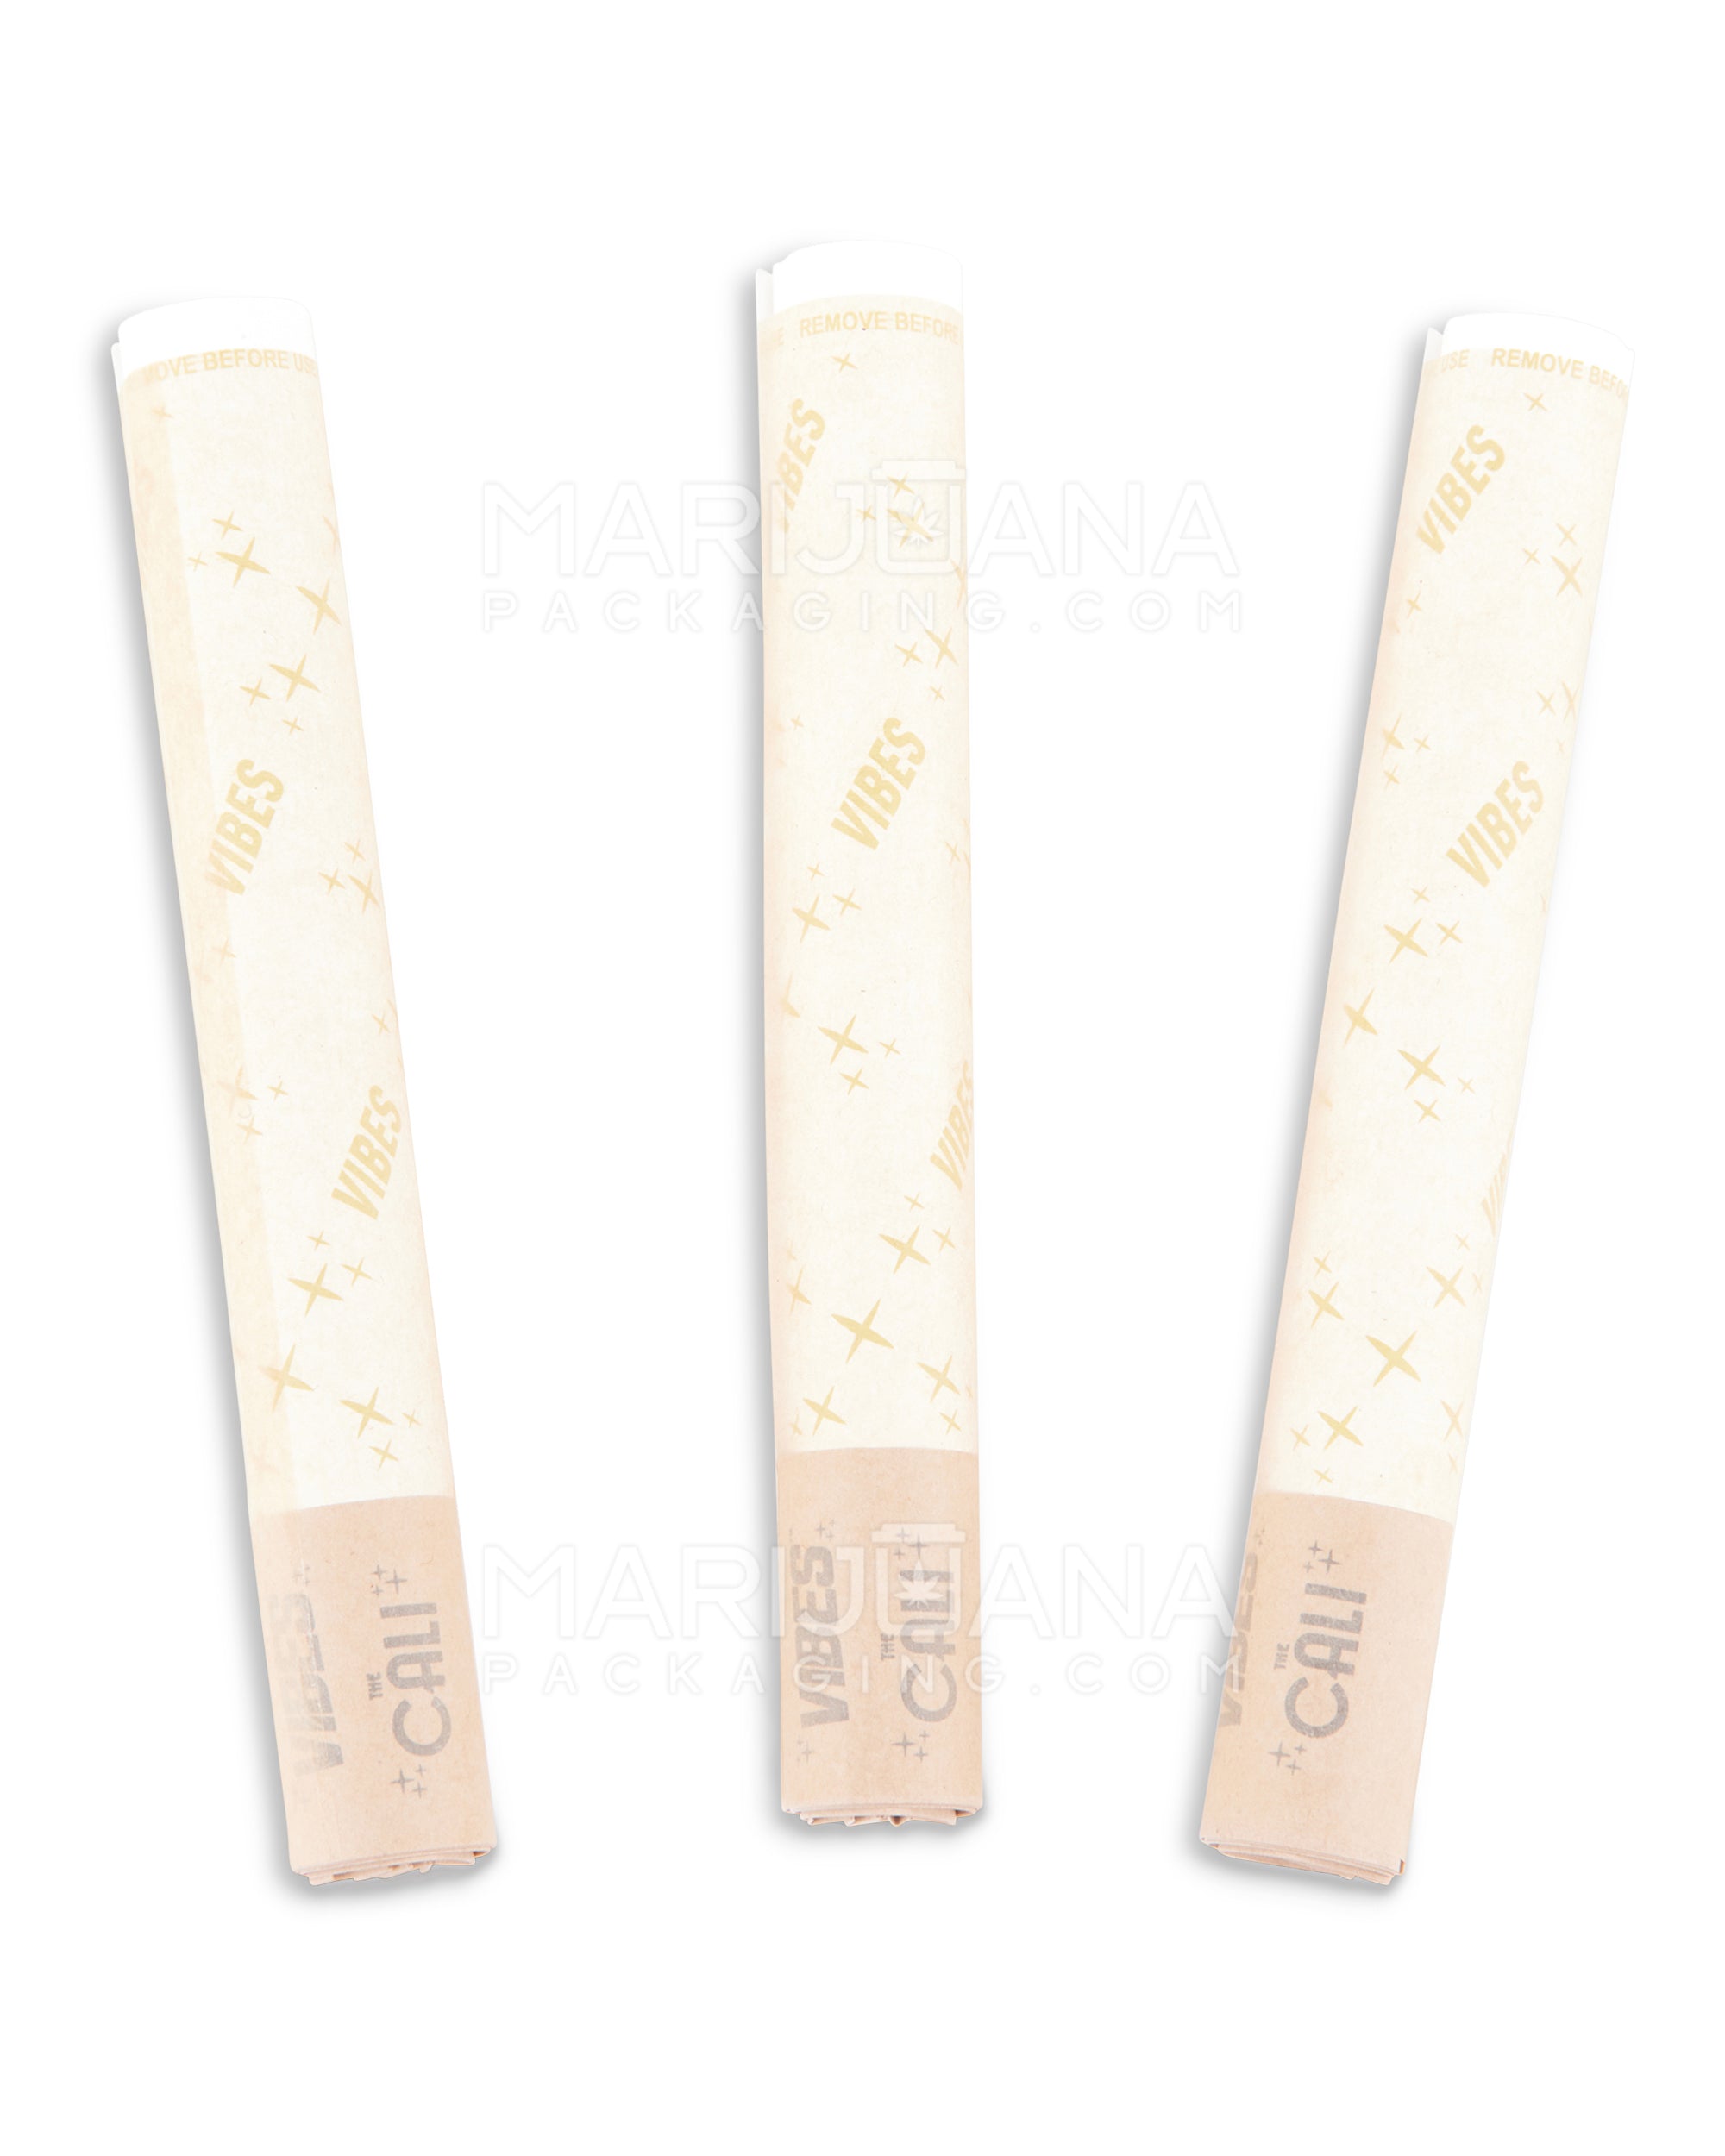 VIBES | 'Retail Display' The Cali 2 Gram Pre-Rolled Cones | 110mm - Ultra Thin Paper - 24 Count - 4